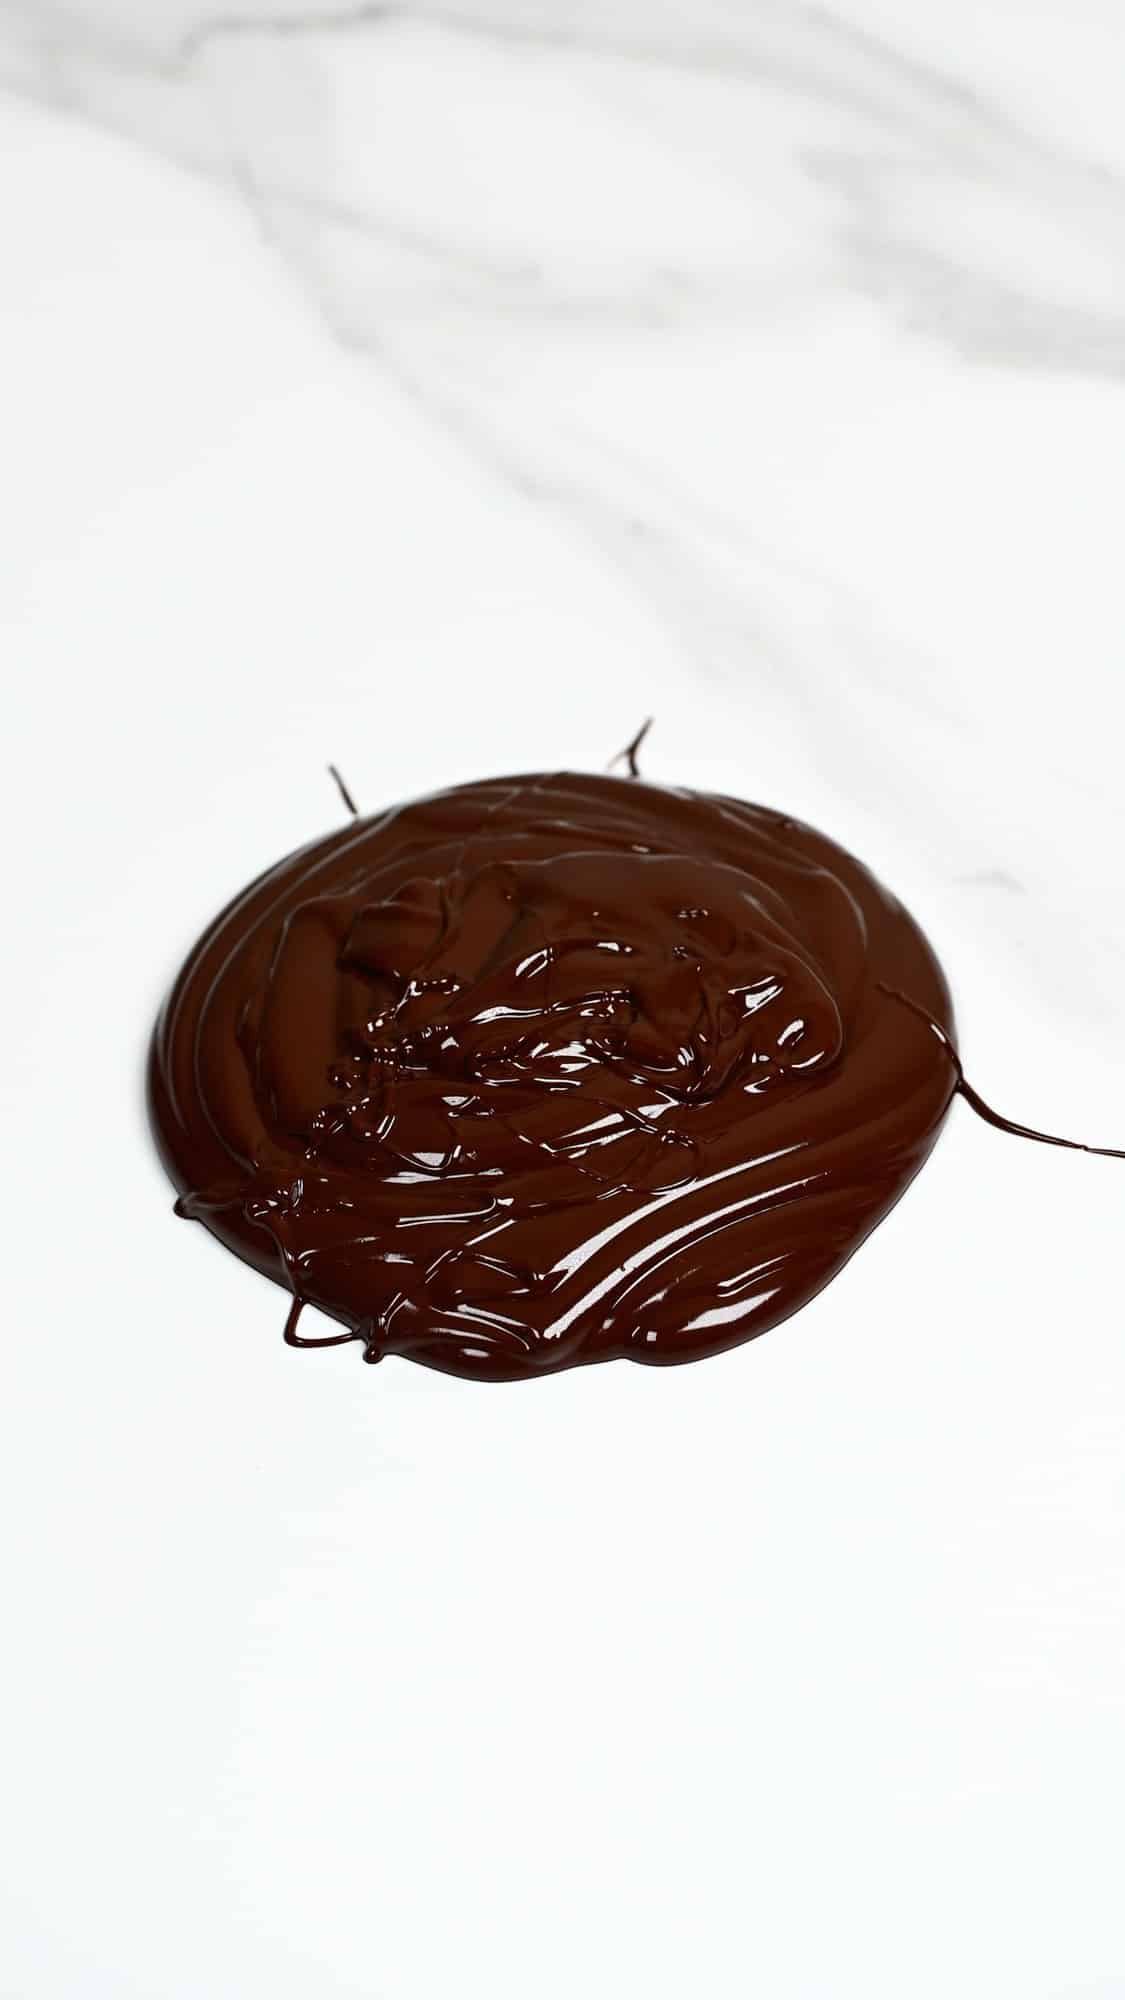 https://www.alphafoodie.com/wp-content/uploads/2021/04/Melted-chocolate-on-flat-surface.jpeg